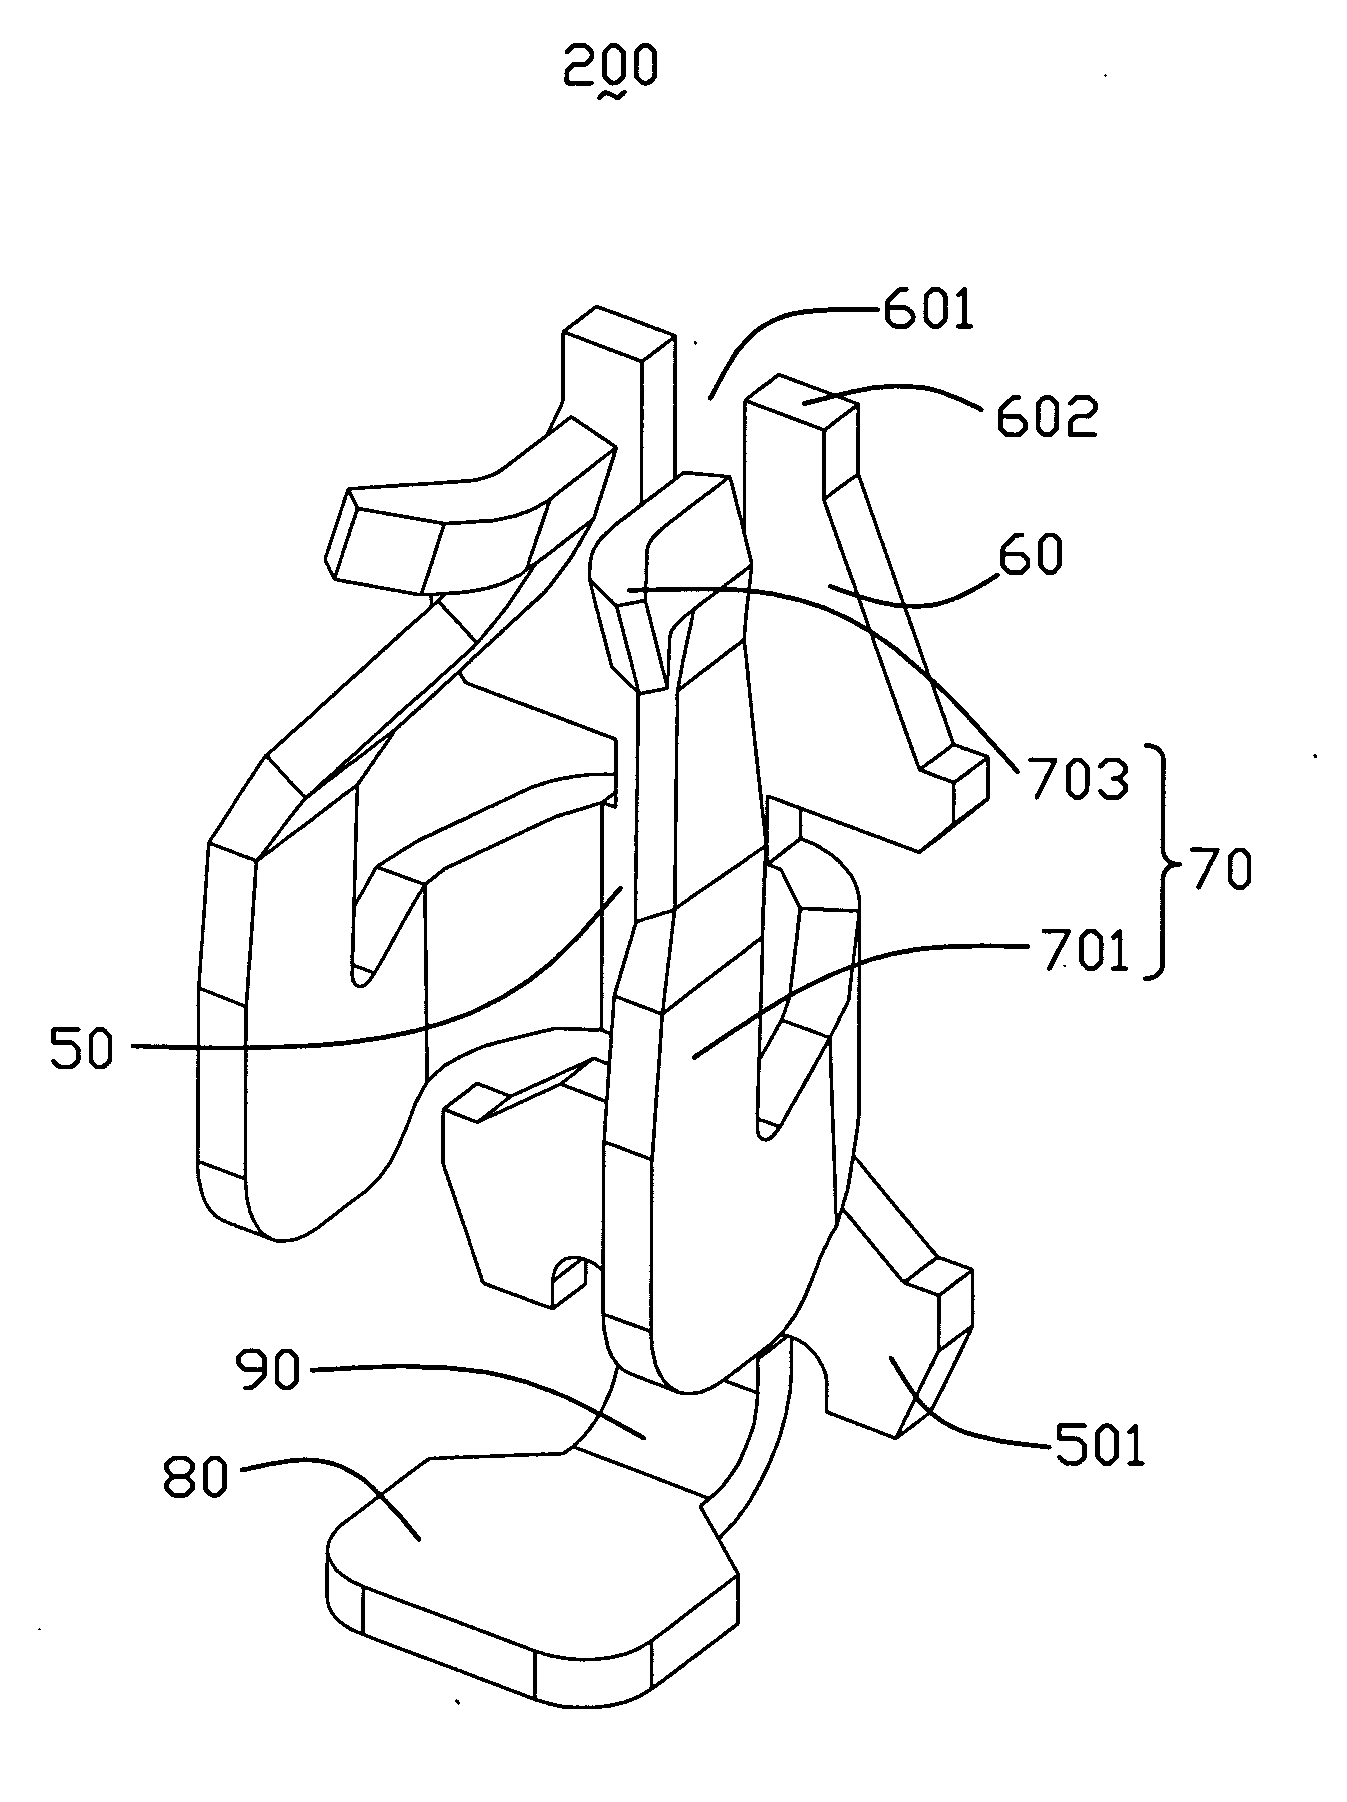 Conductive contact for CPU socket connector